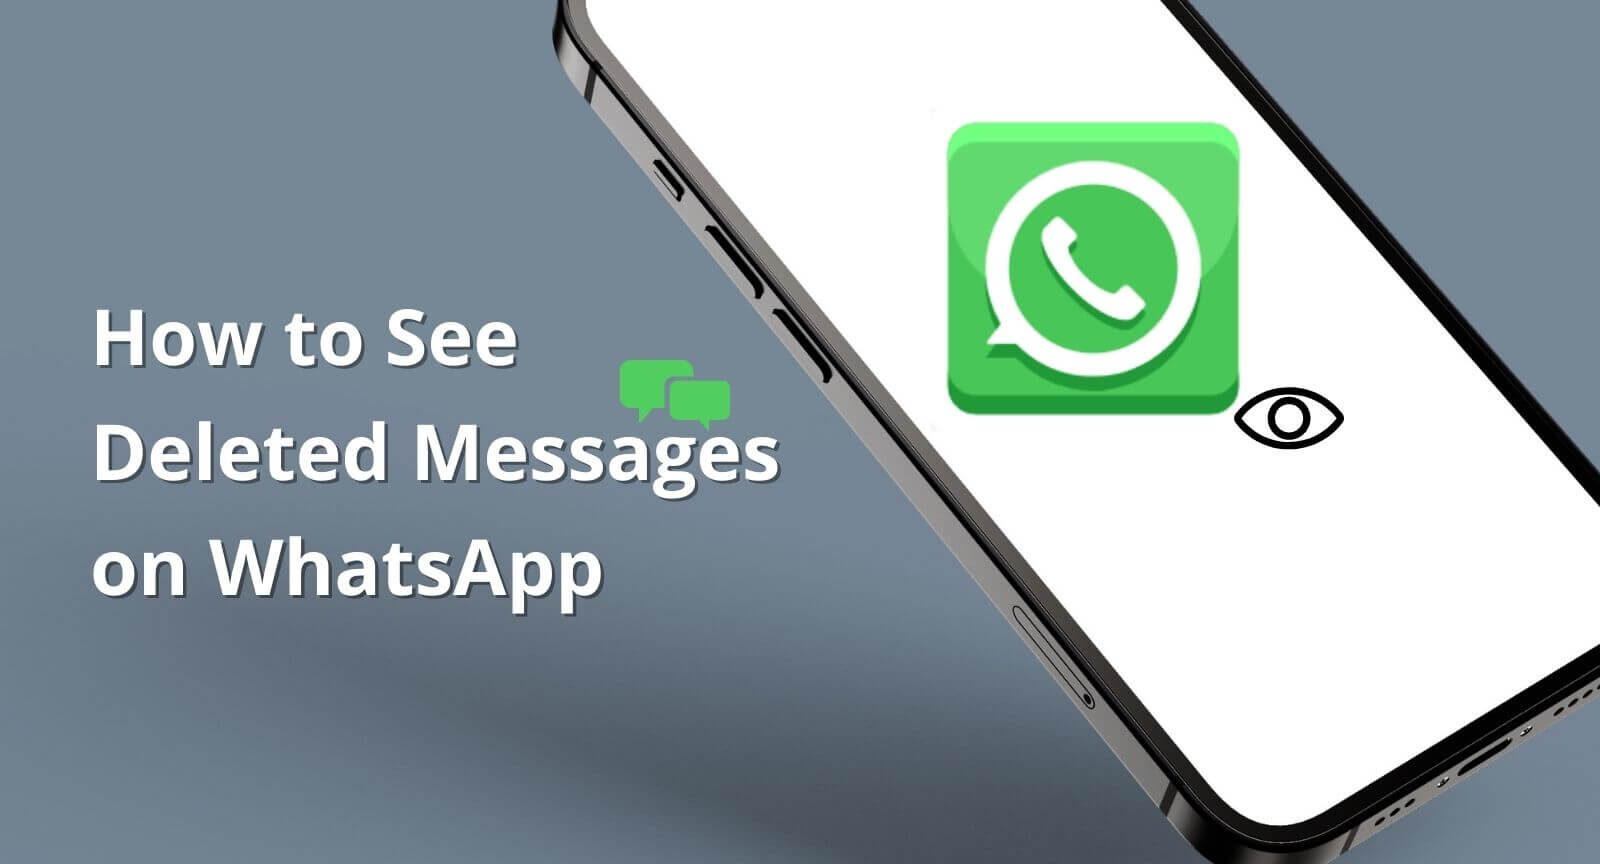 A green and white graphic with the WhatsApp logo on the right and a chat bubble with the words 'deleted messages' on the left. The text 'How to see deleted messages on WhatsApp' is overlaid on top.